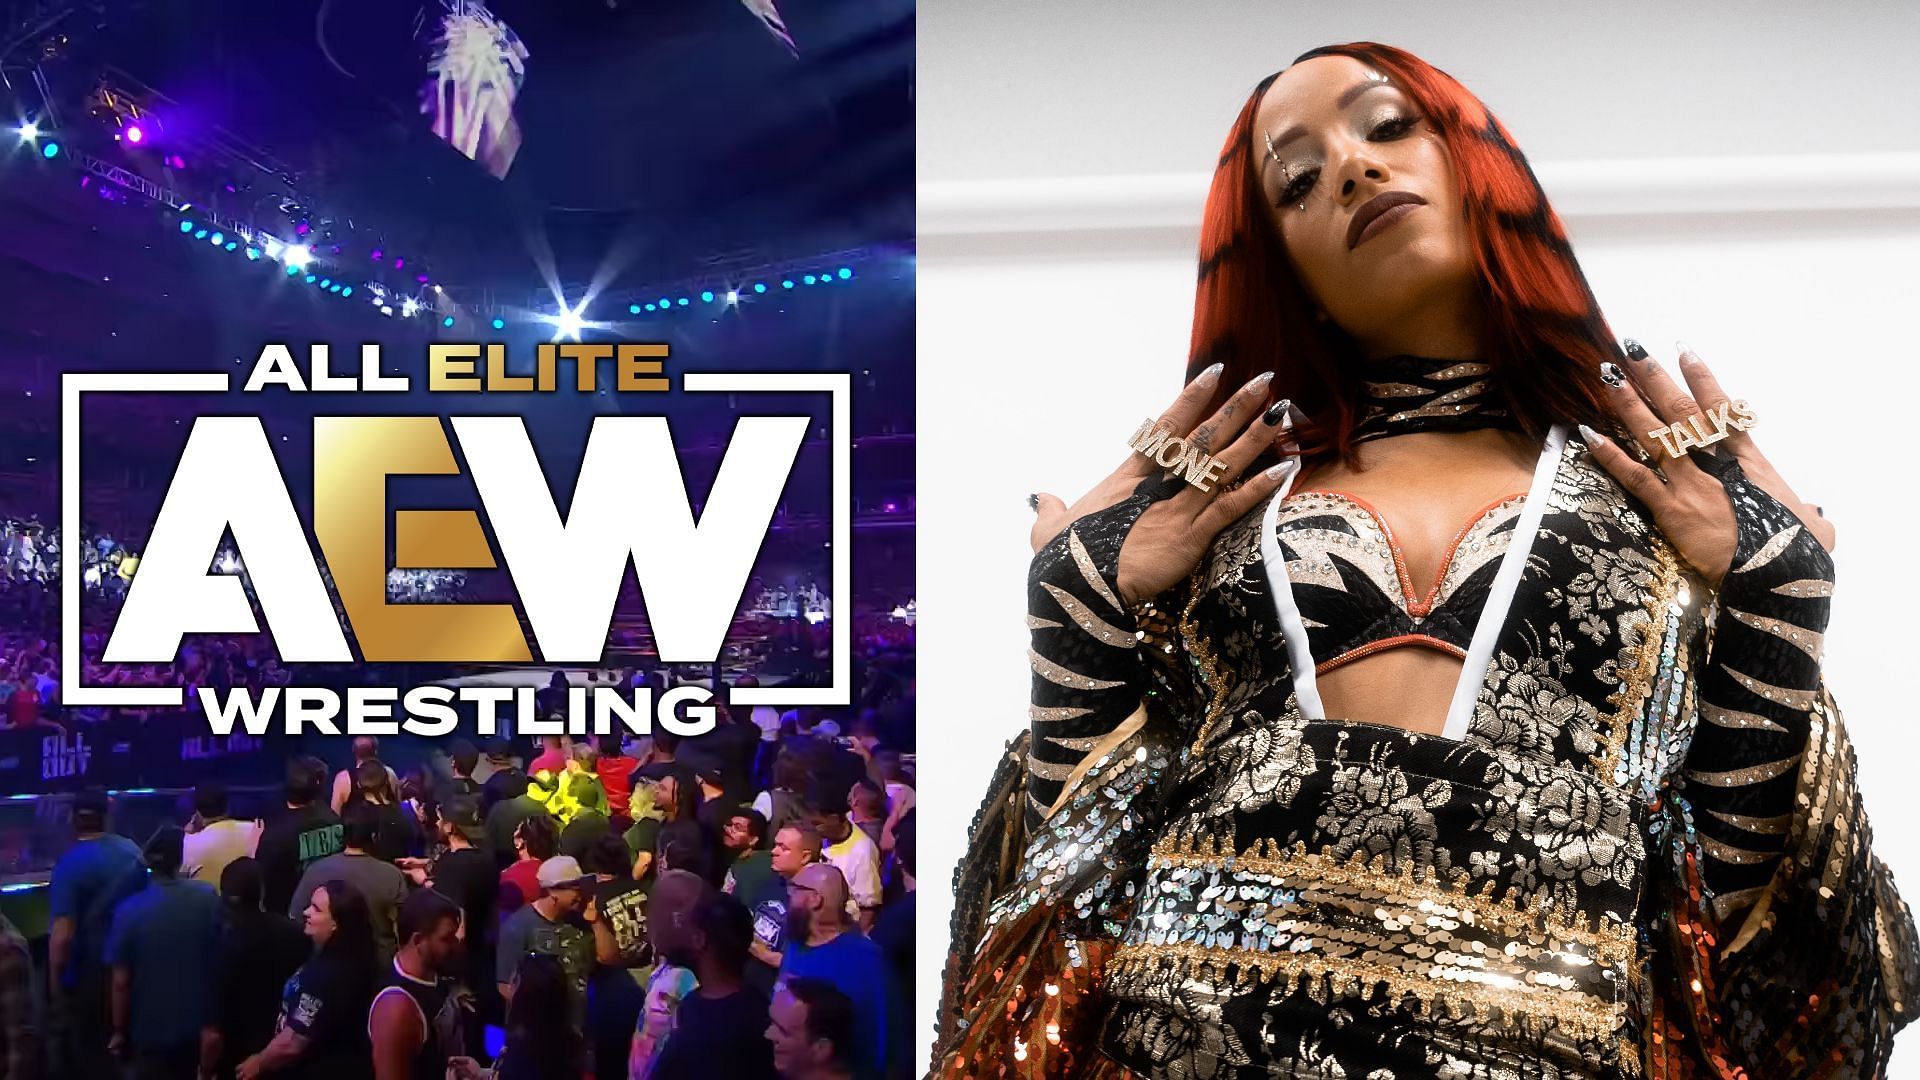 Mone is allegedly set to make her debut at AEW Dynamite: Big Business